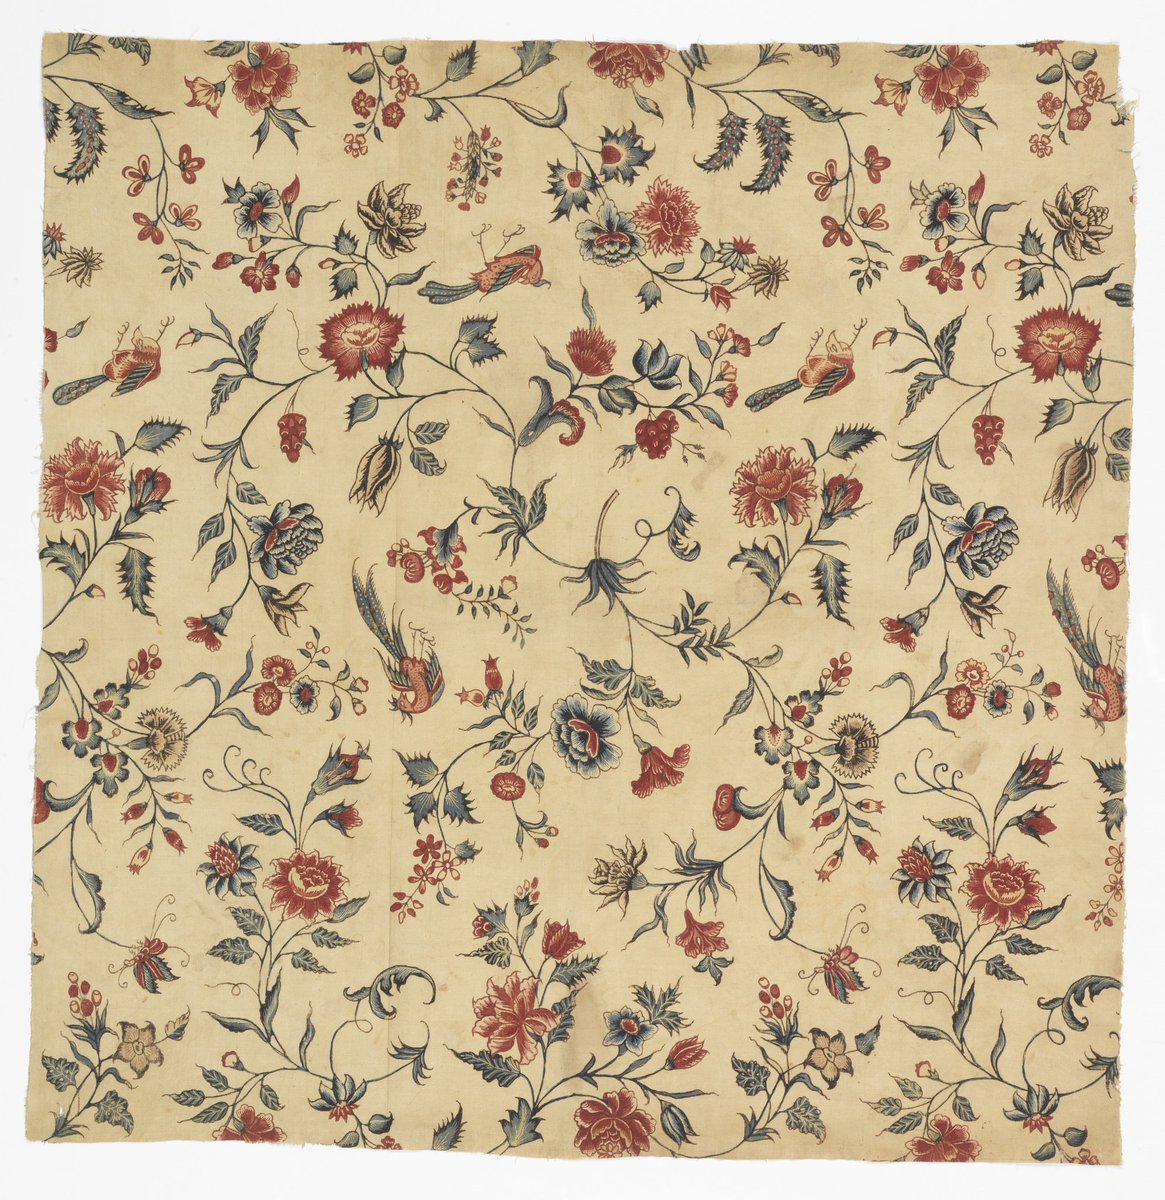 Calico from Calicut (in Kerala), from where the fabric was originally exported. Calico is a type of cotton cloth, typically plain white or unbleached.Chintz from Hindi छींट (chī̃ṭ). It is a printed multicoloured fabric with a glazed finish, used for curtains & upholstery.